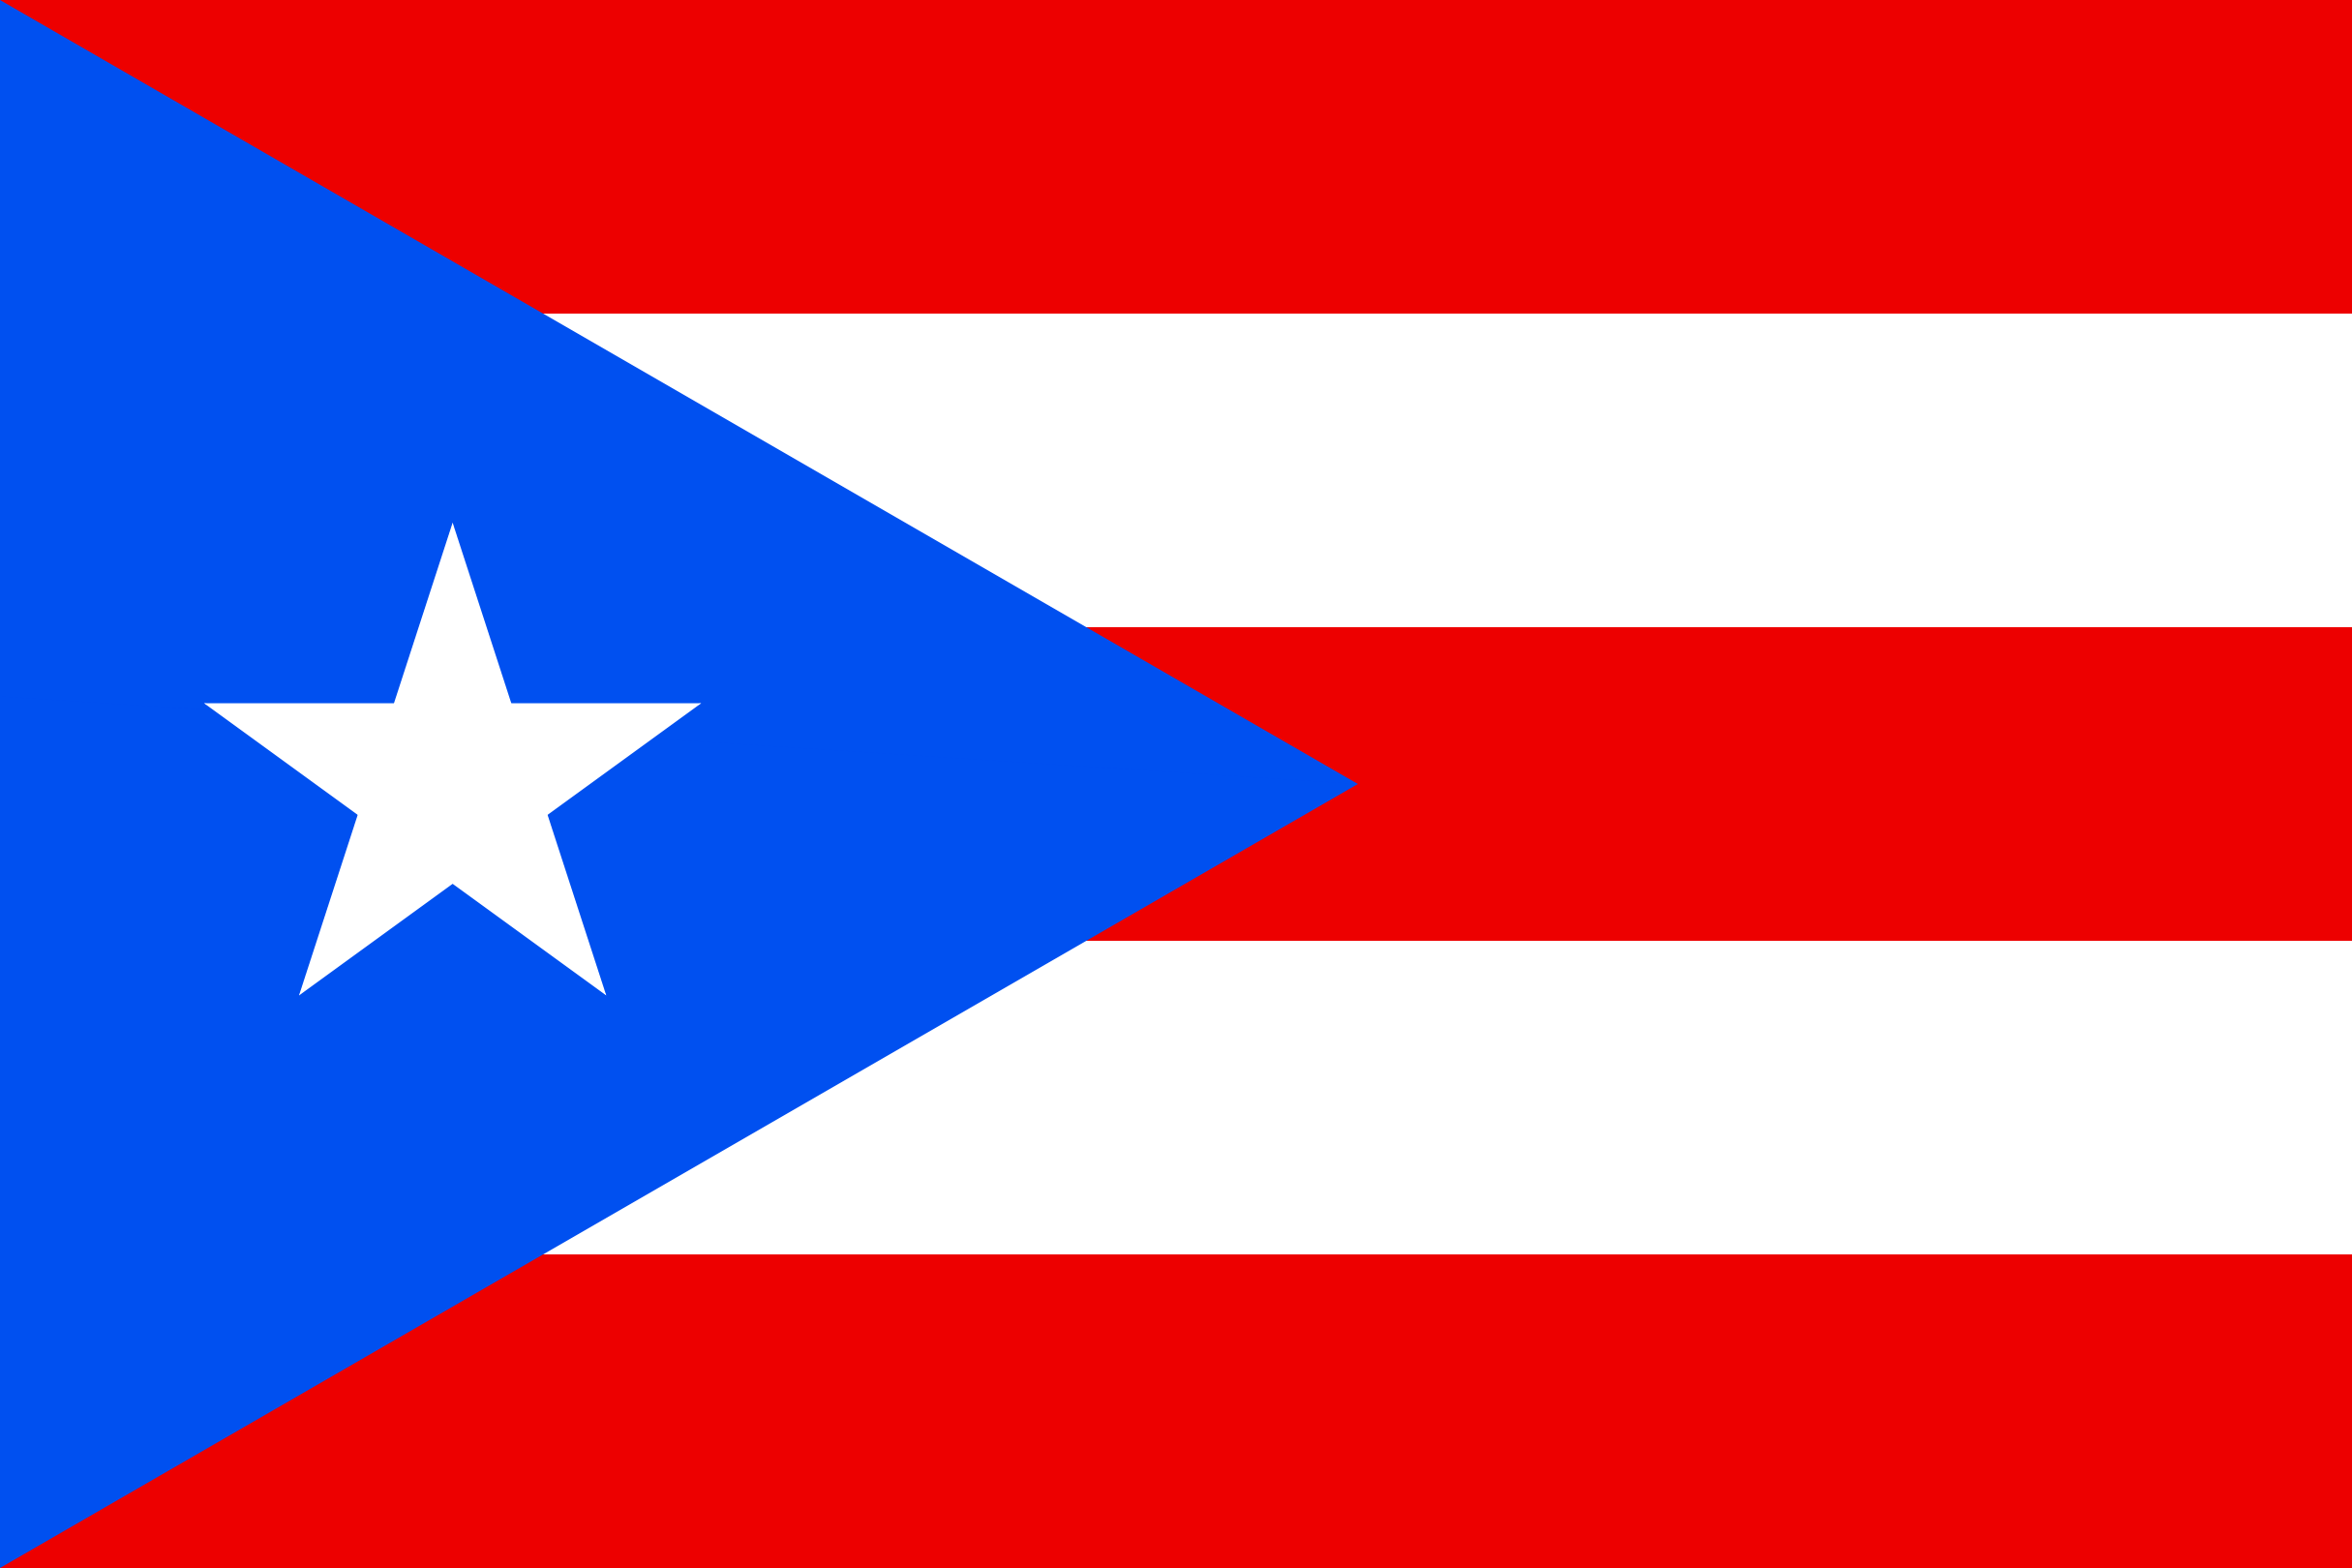 the image shows the puerto rican flag